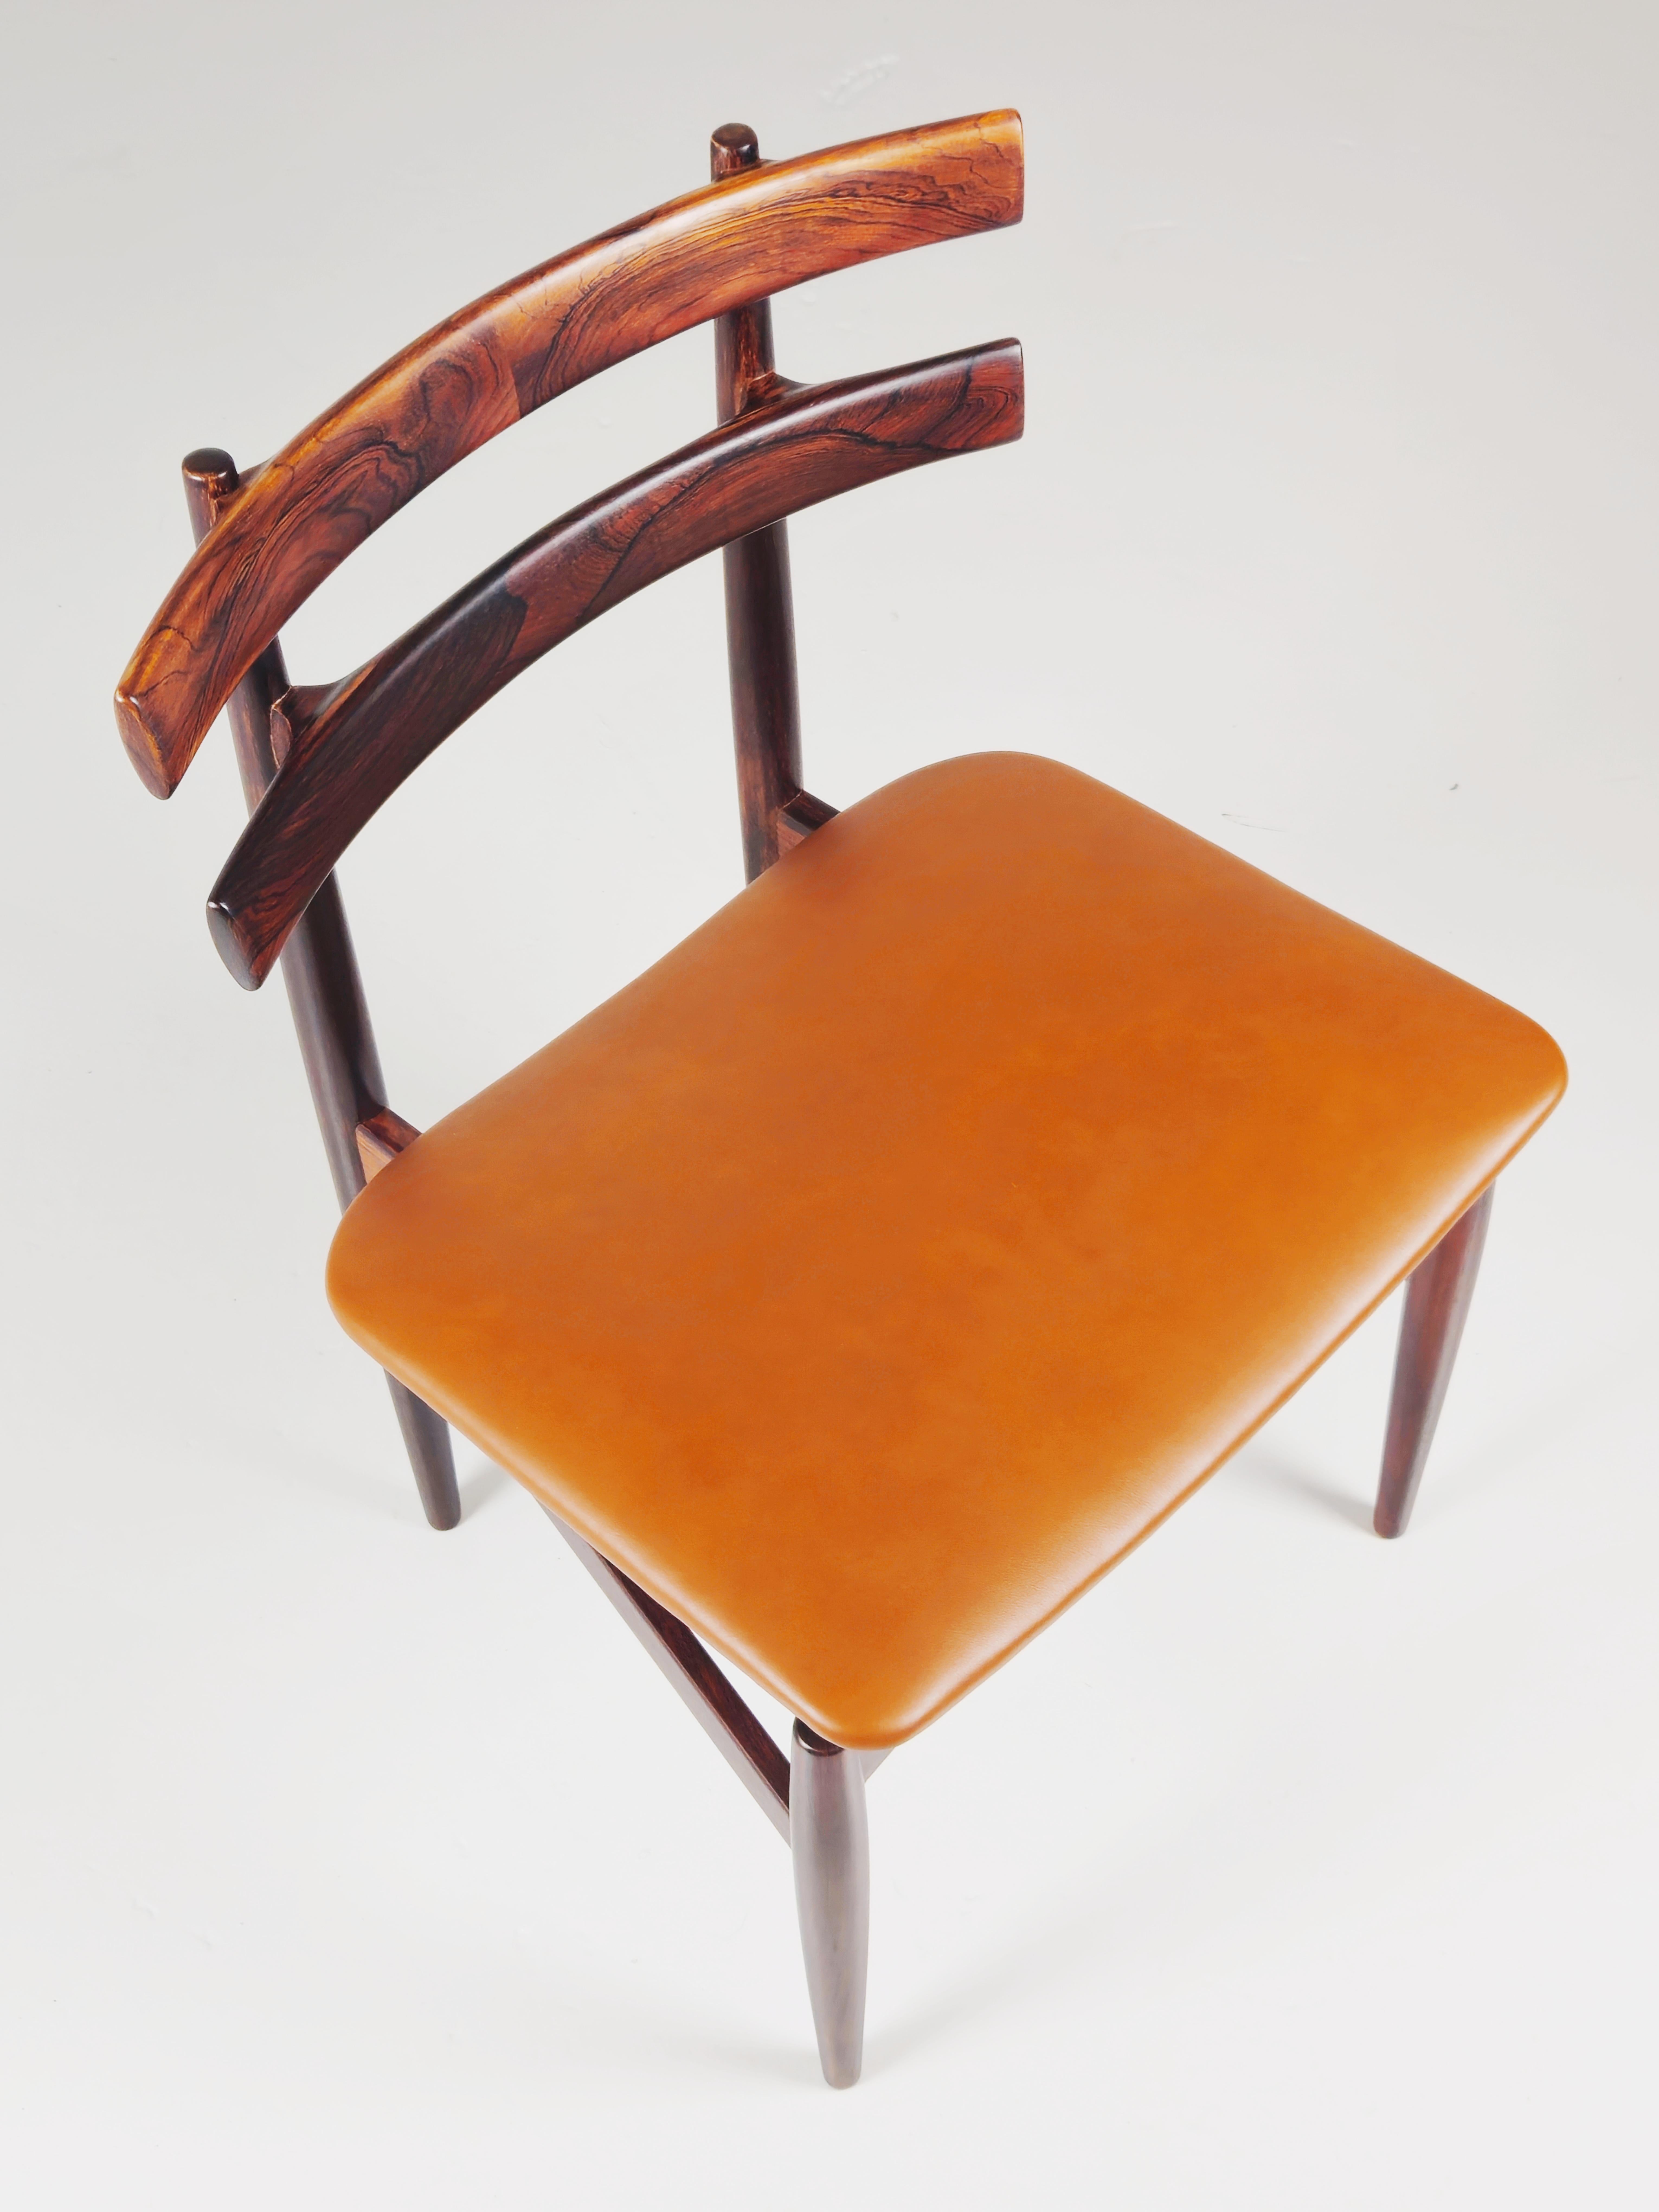 Rare rosewood chair 'Model 30' by Poul Hundevad, Denmark, 1950s For Sale 3